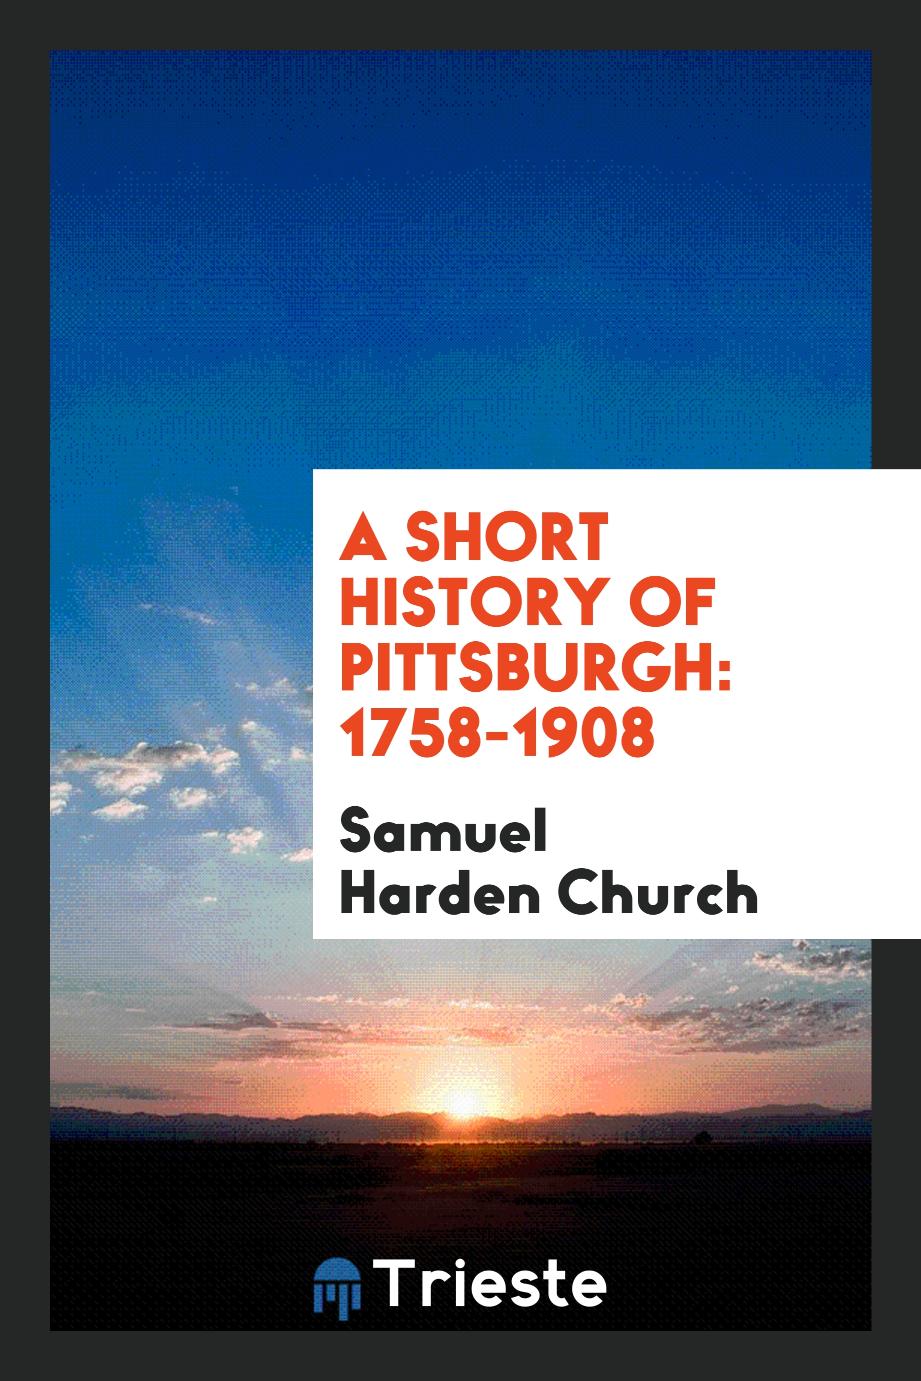 A Short History of Pittsburgh: 1758-1908